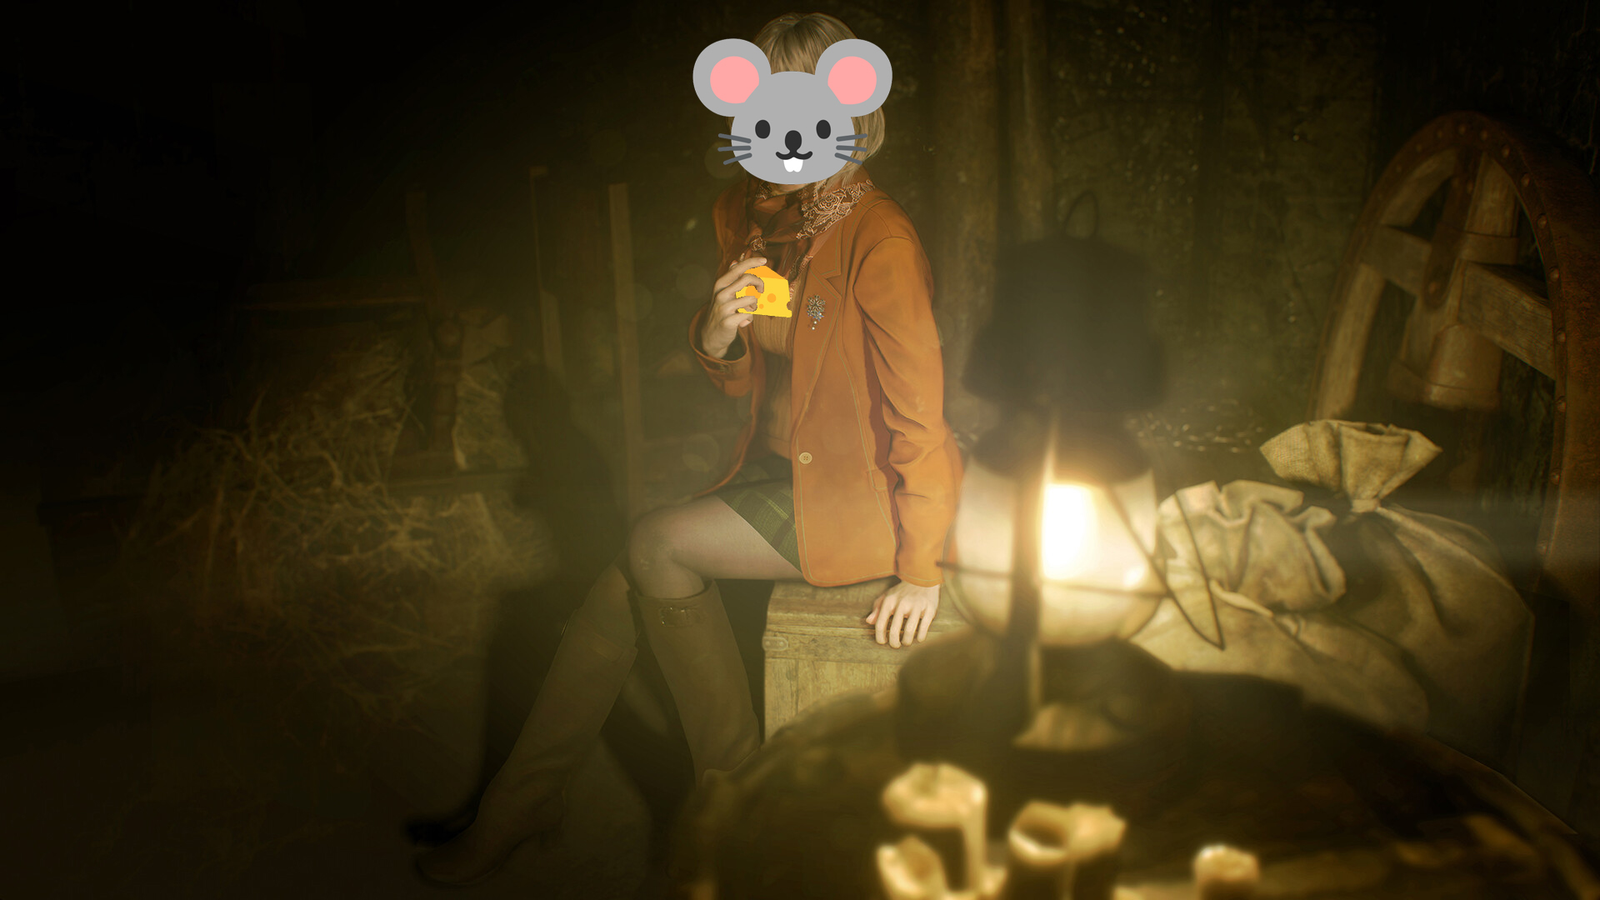 Ashley Graham as A Mouse (Moushly / Moushley)